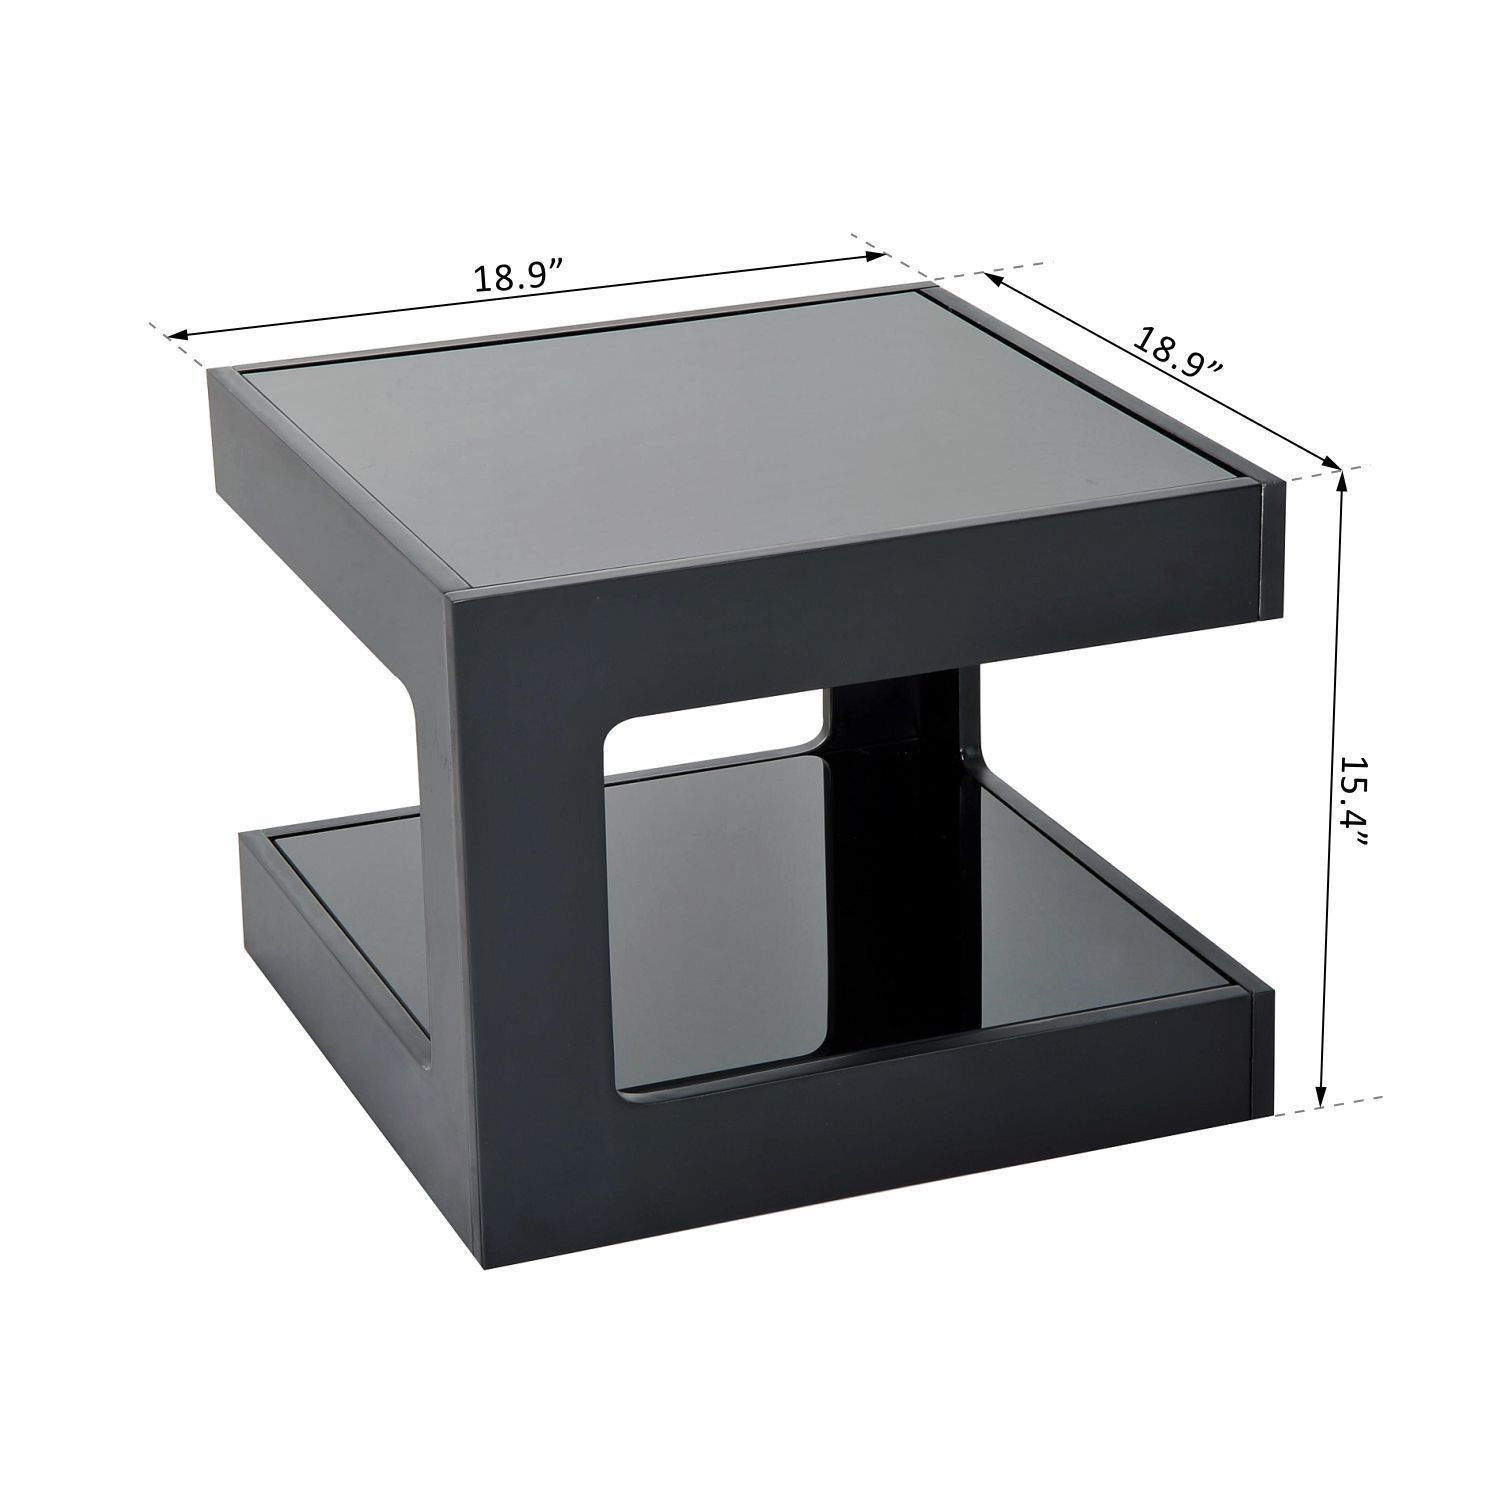 Square Living Room Table
 Modern Square Cube Coffee Side Sofa End Table w Glass Top